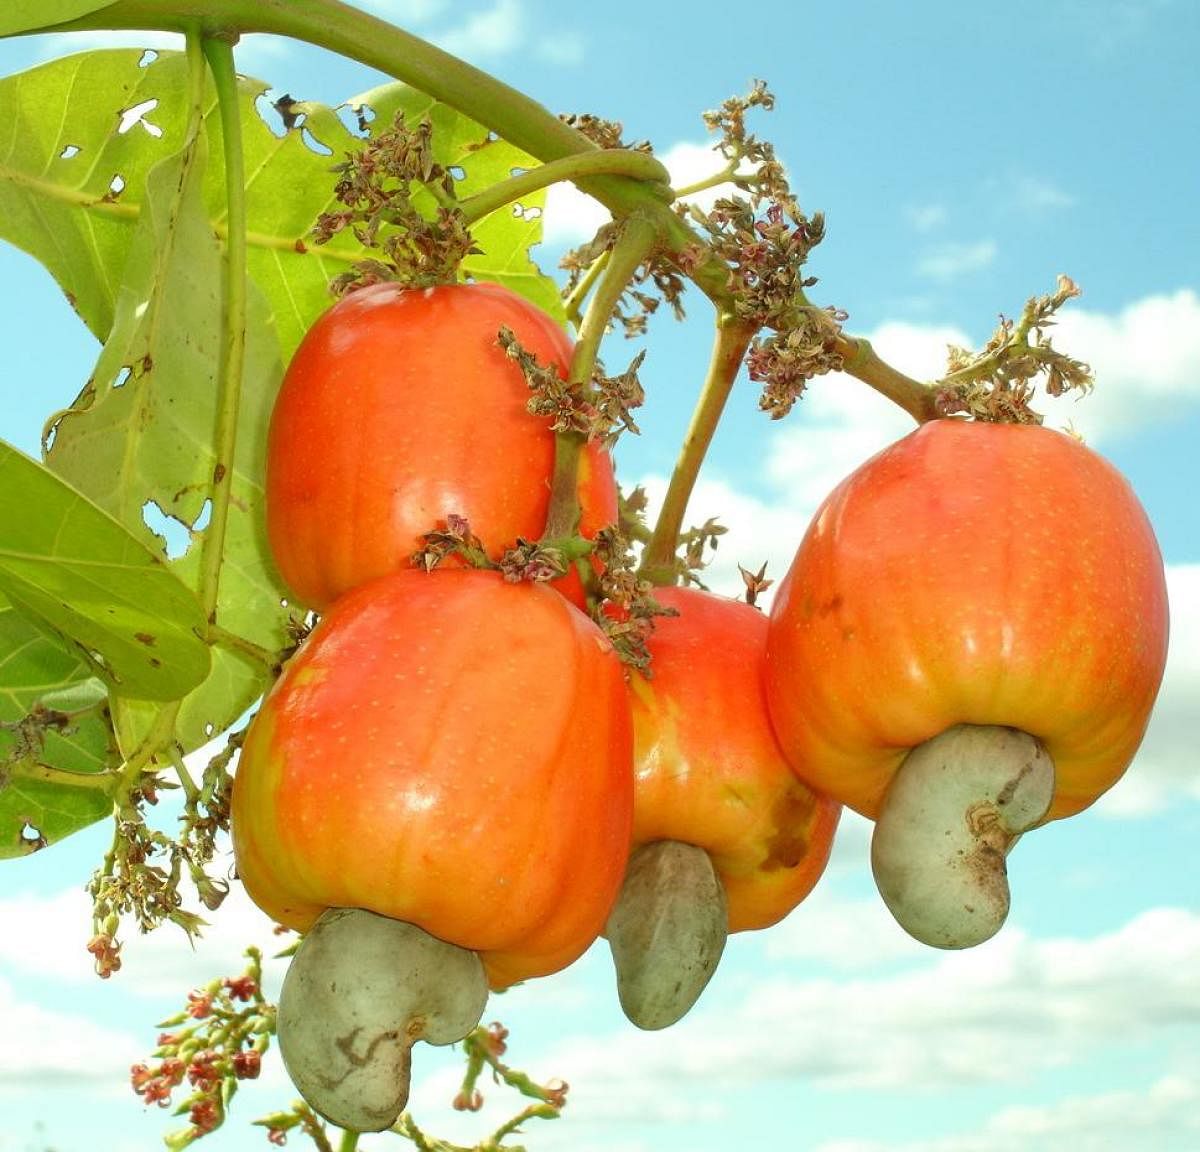 Import duty on raw cashew nuts should be enhanced to benefit local farmers.